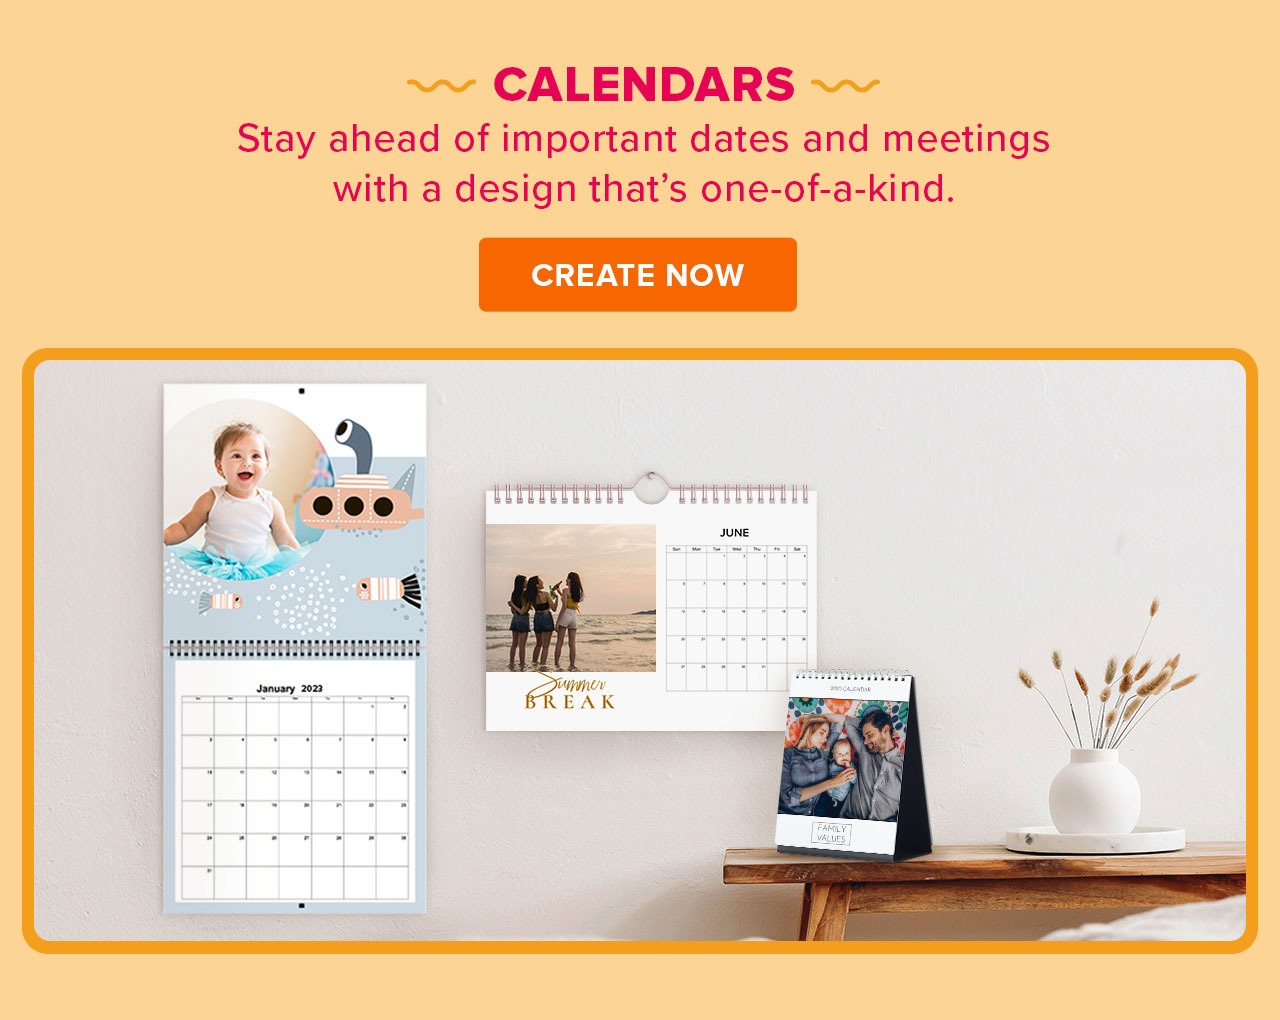 CALENDARS Stay ahead of important dates and meetings with a design thats one-of-a-kind. CREATE NOW 1- c.. T P R 